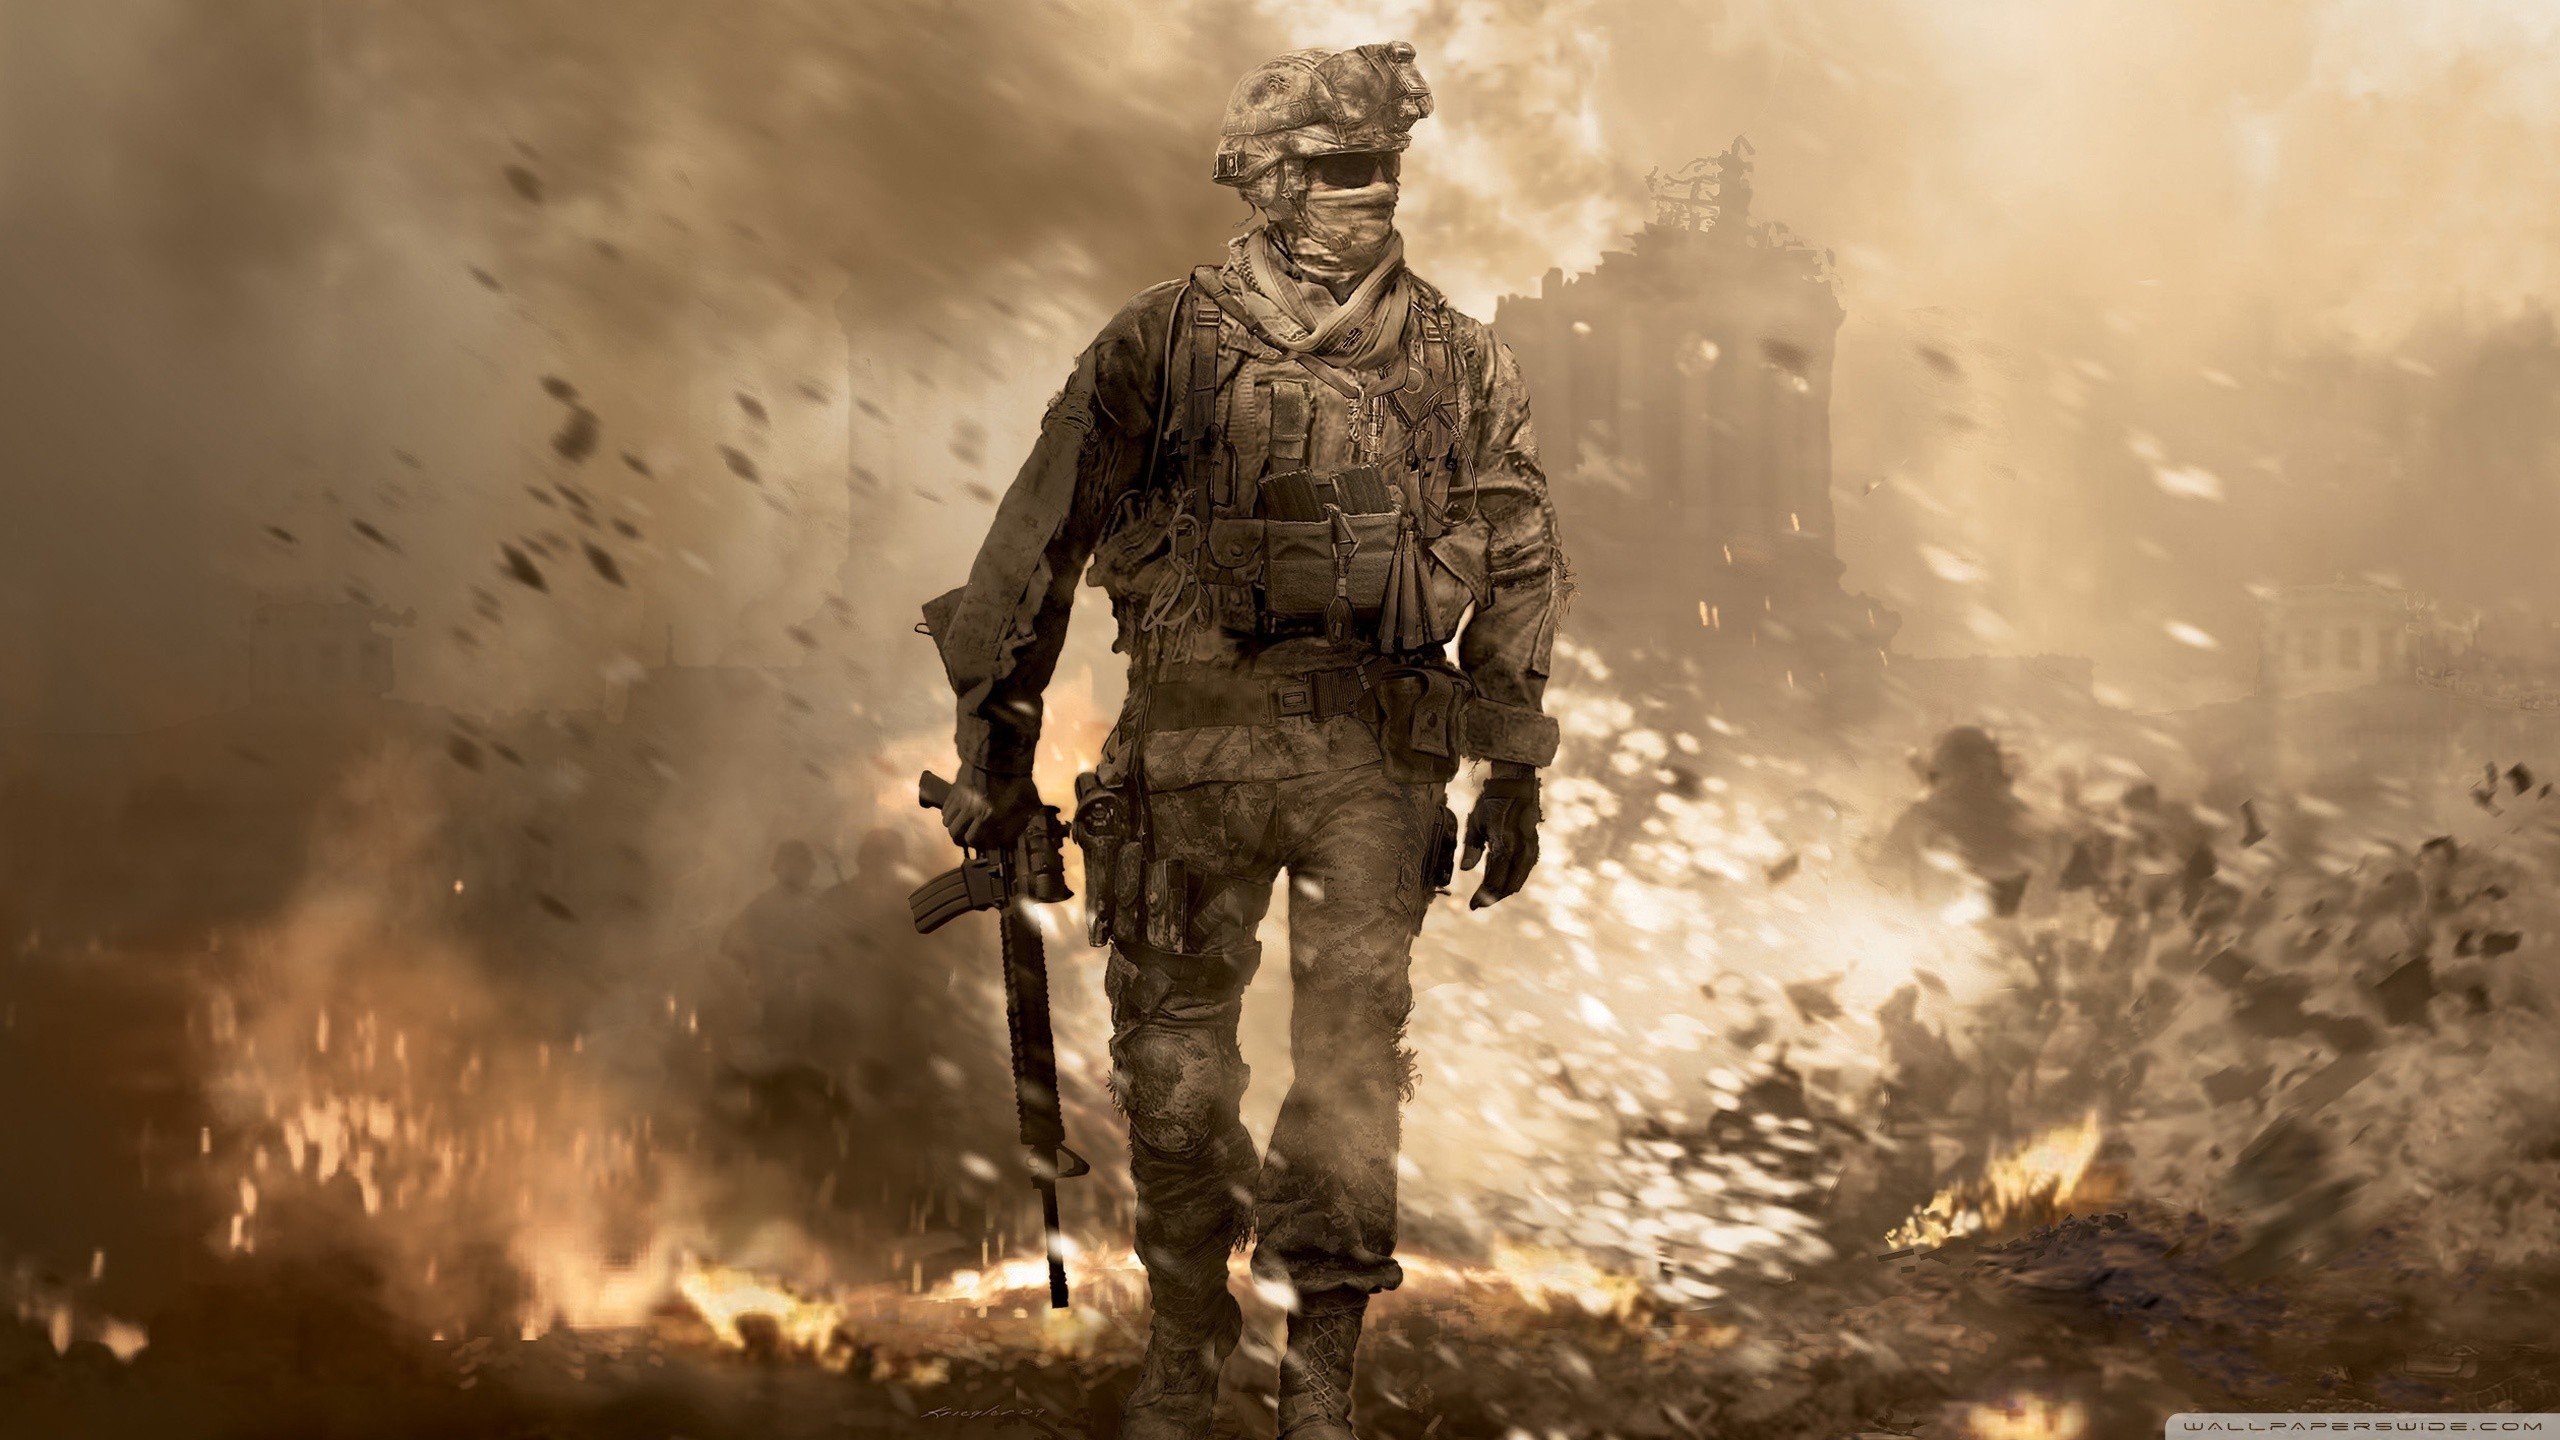 soldiers, Video, Games, Explosions Wallpaper